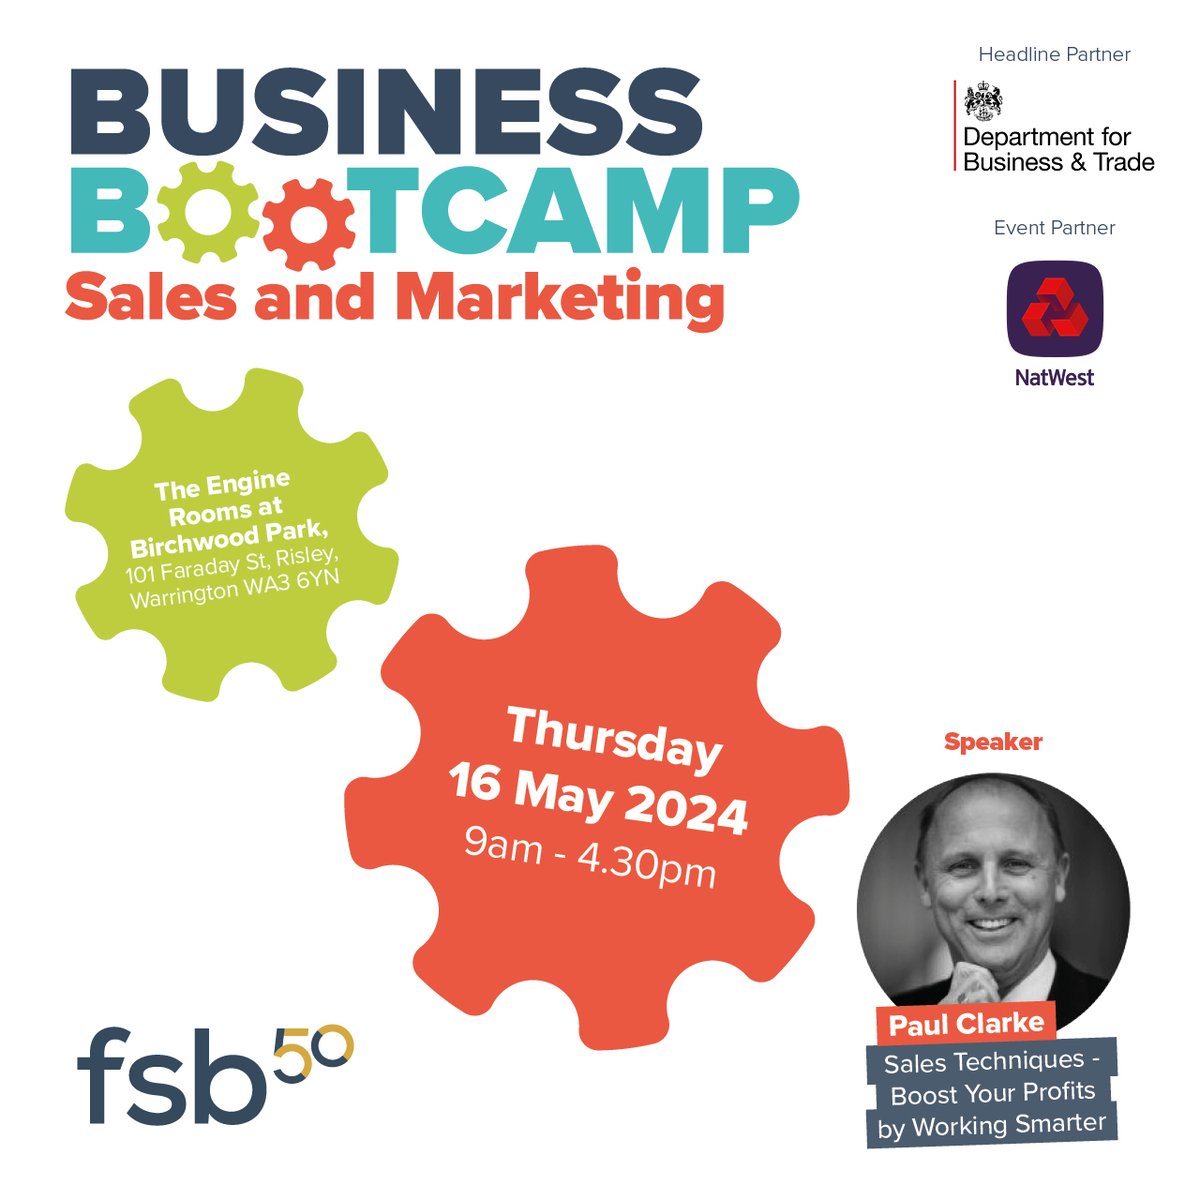 Learn how to Boost Your Profits by Working Smarter with Paul Clarke at the North West Bootcamp on 16 May 🚀 Find out more and book your place 🔗 go.fsb.org.uk/48wqksC #FSBbootcamp